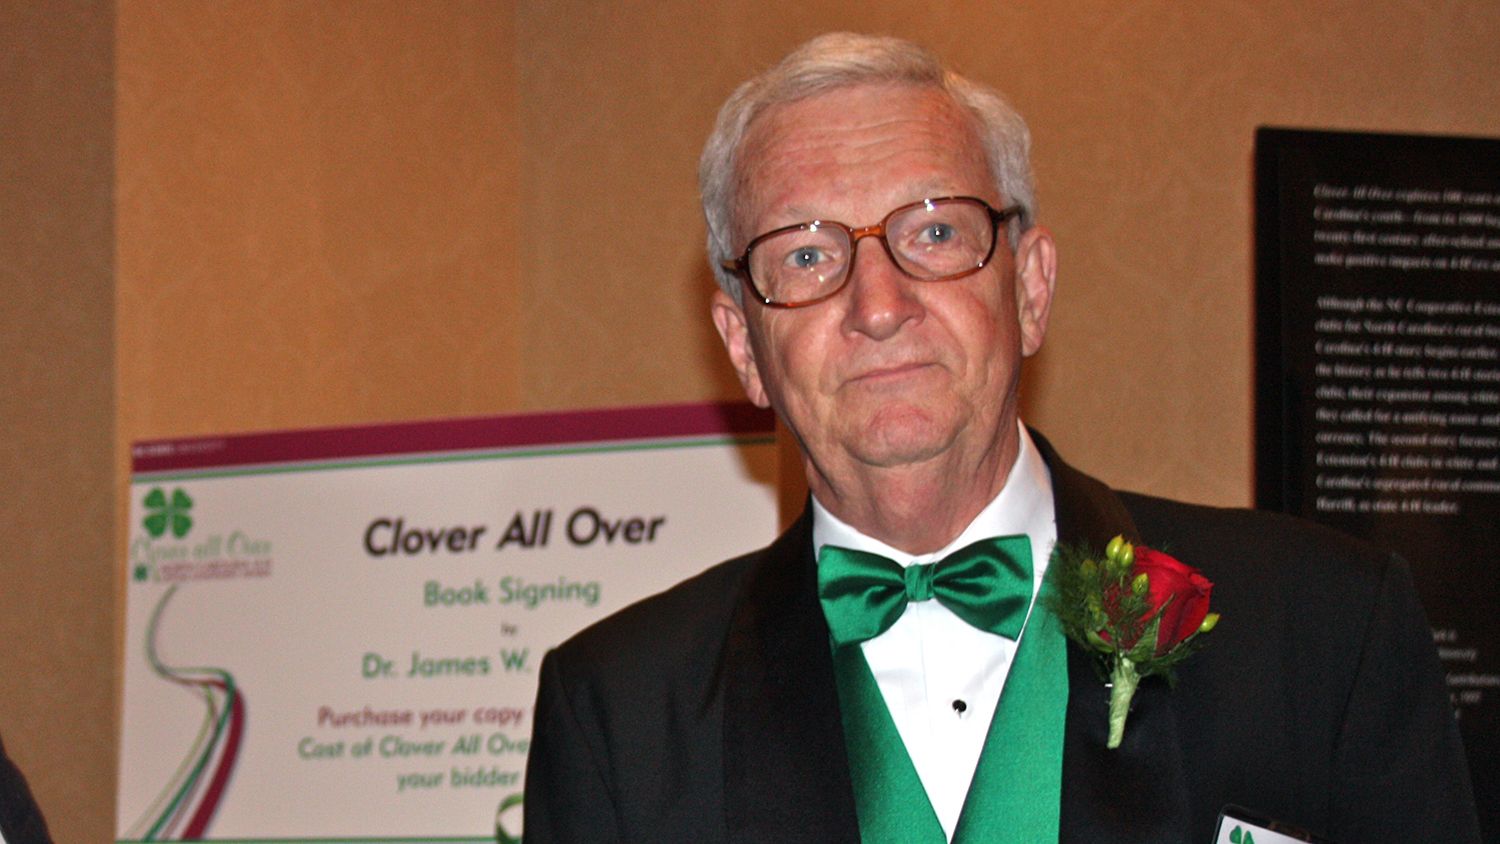 4-H Alumnus Jim Clark has written two histories of North Carolina 4-H, giving back to an organization that deeply influenced his life.